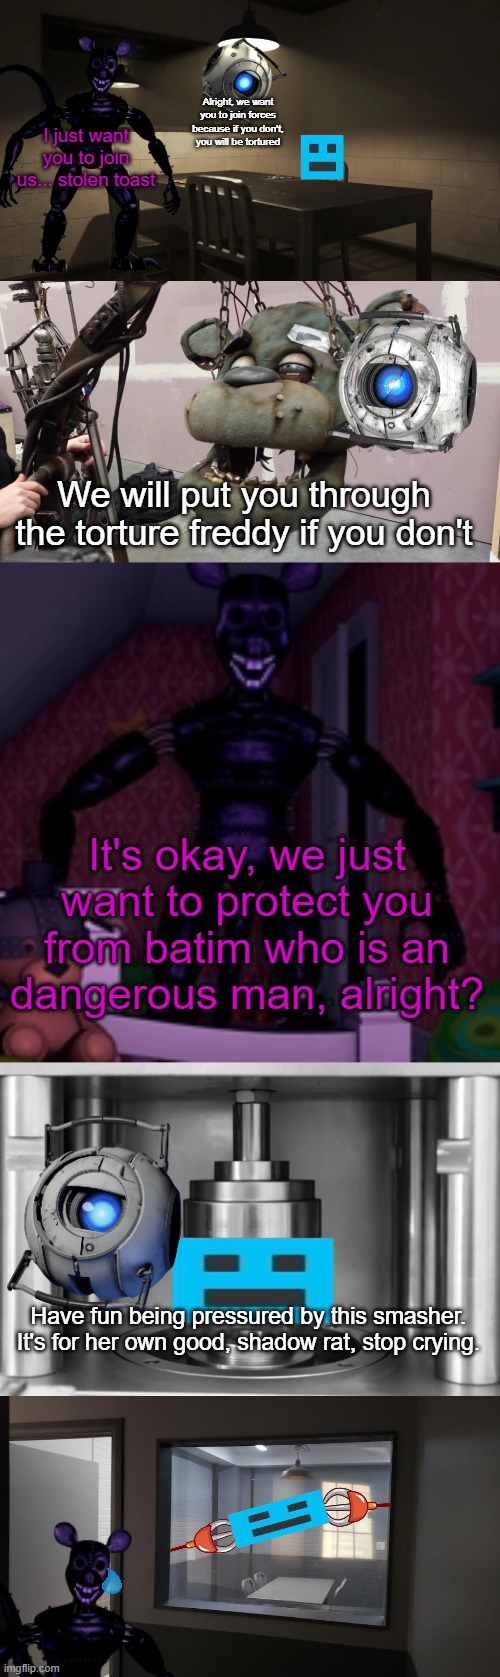 Alright, we want you to join forces because if you don't, you will be tortured; I just want you to join us... stolen toast; We will put you through the torture freddy if you don't; It's okay, we just want to protect you from batim who is an dangerous man, alright? Have fun being pressured by this smasher. It's for her own good, shadow rat, stop crying. | made w/ Imgflip meme maker